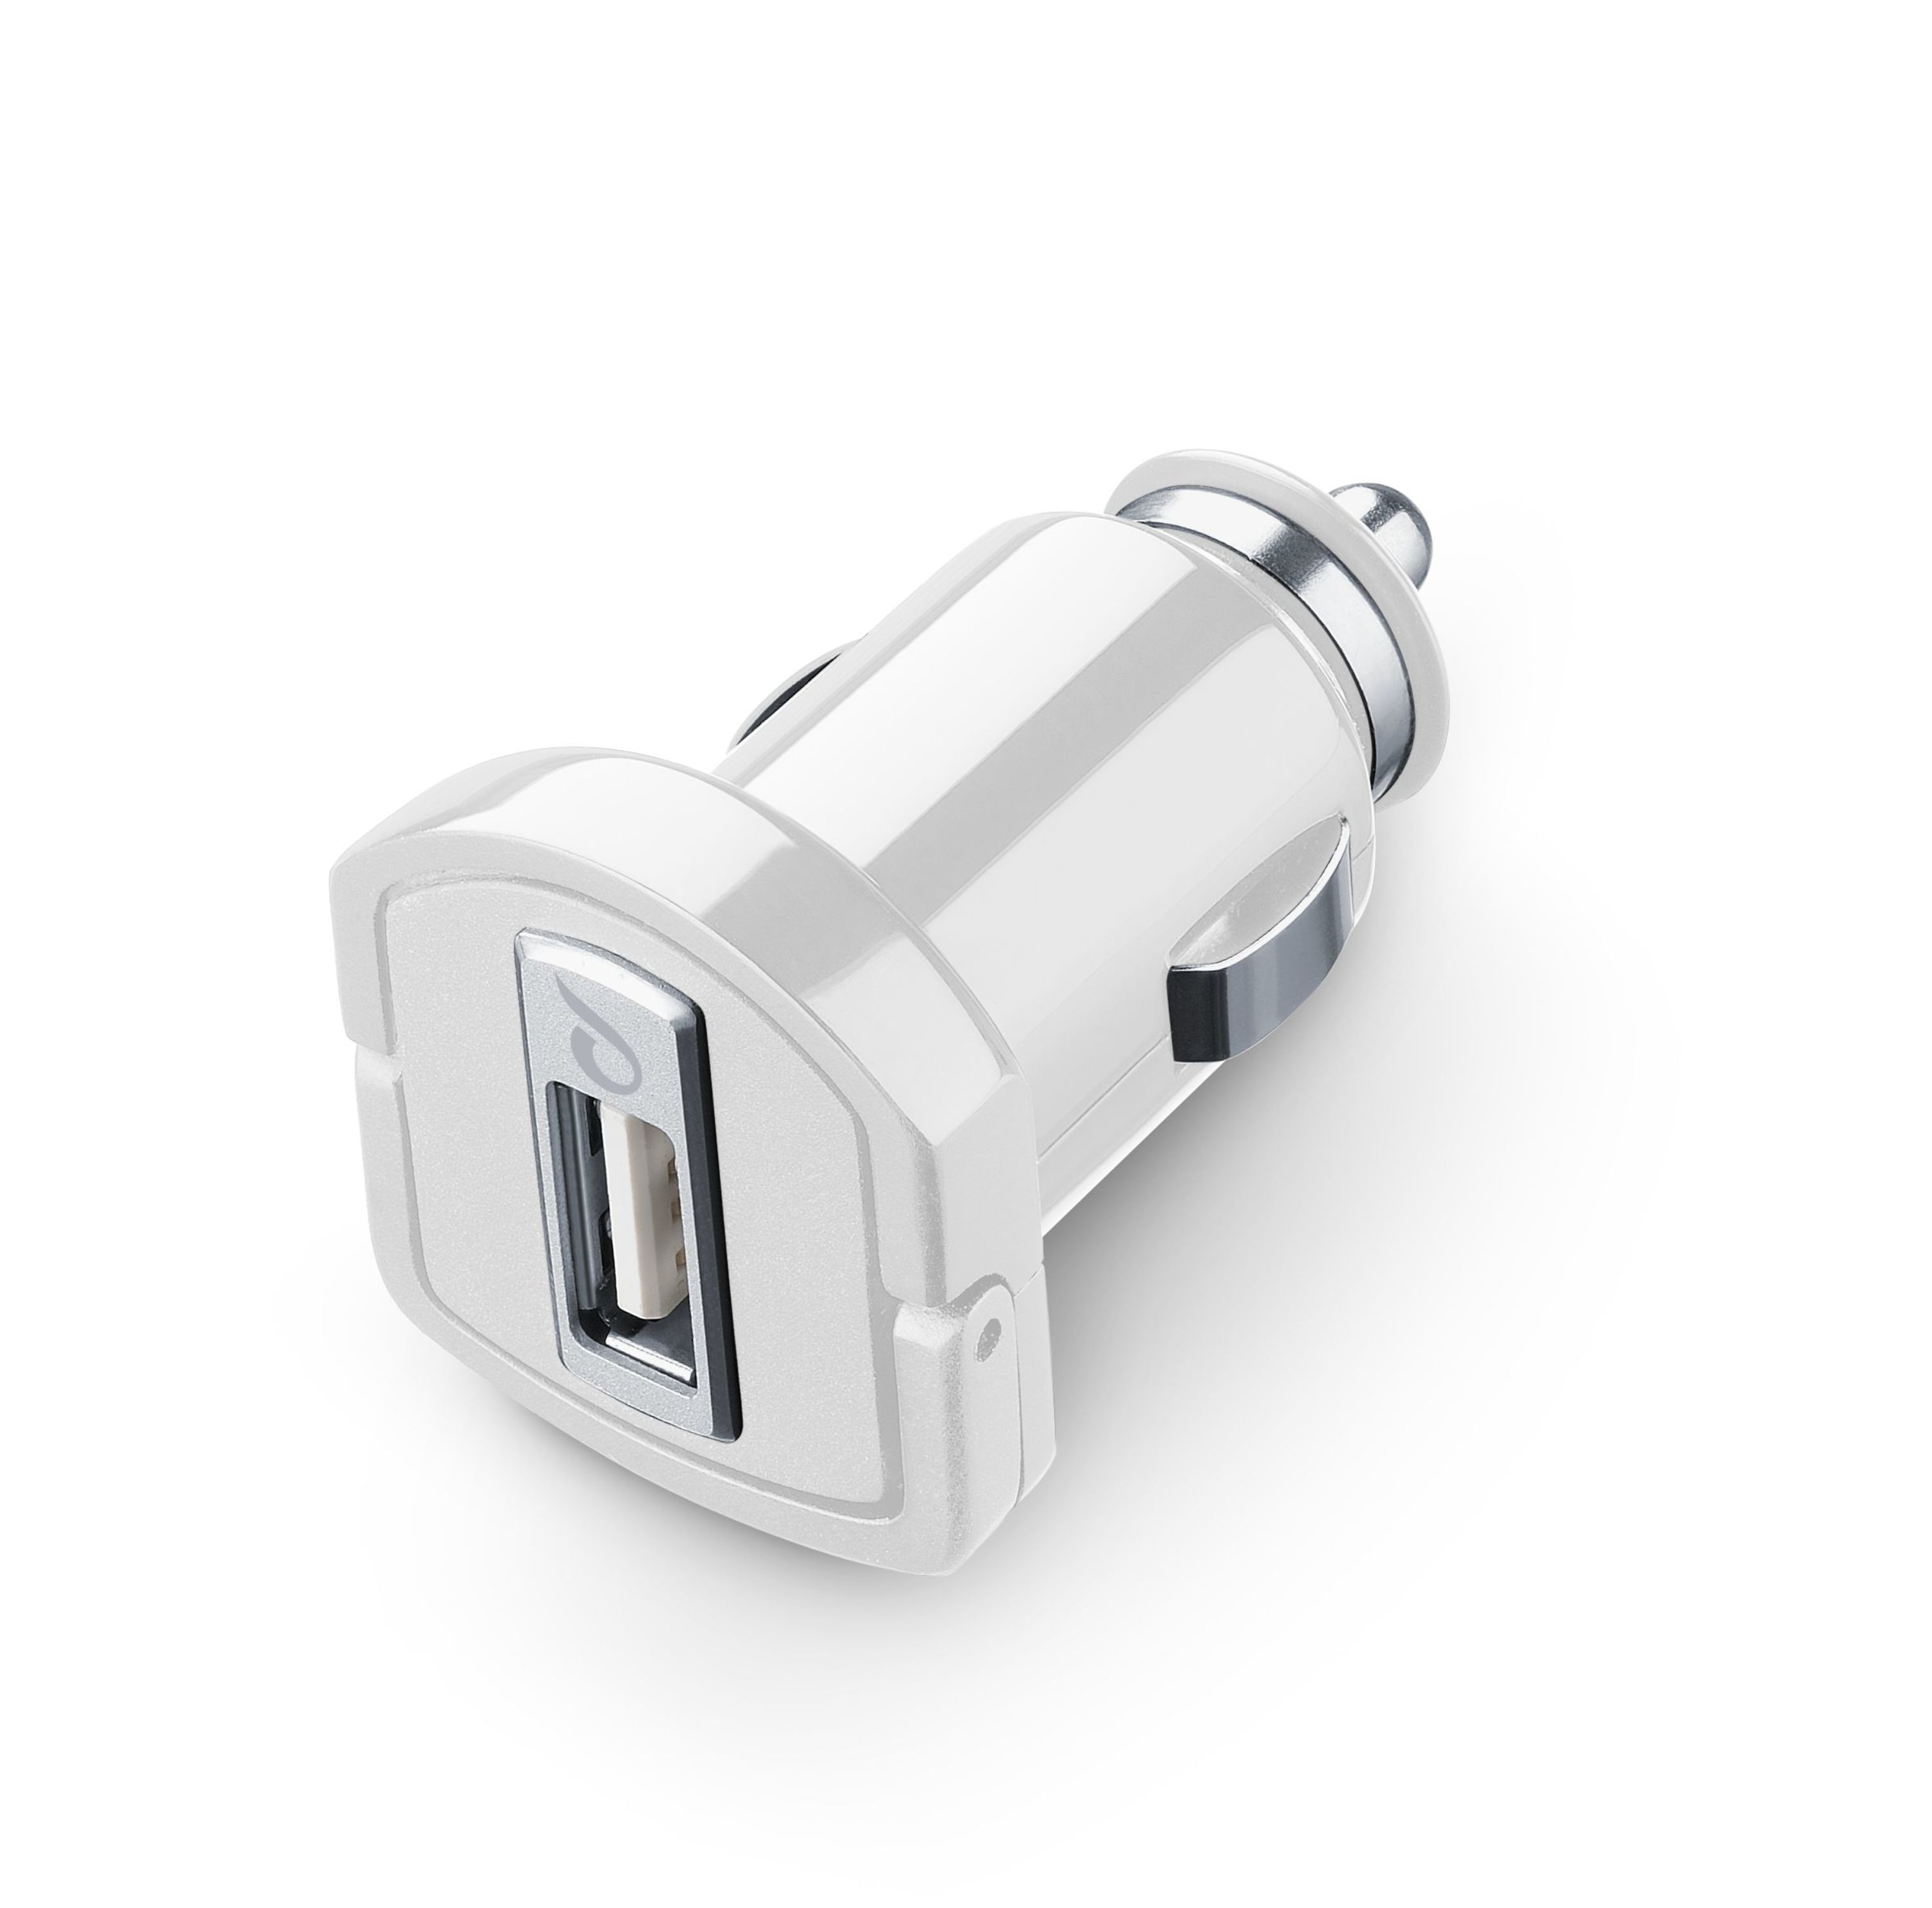 Chargeur voiture usb, 5W/1A Apple, blanc